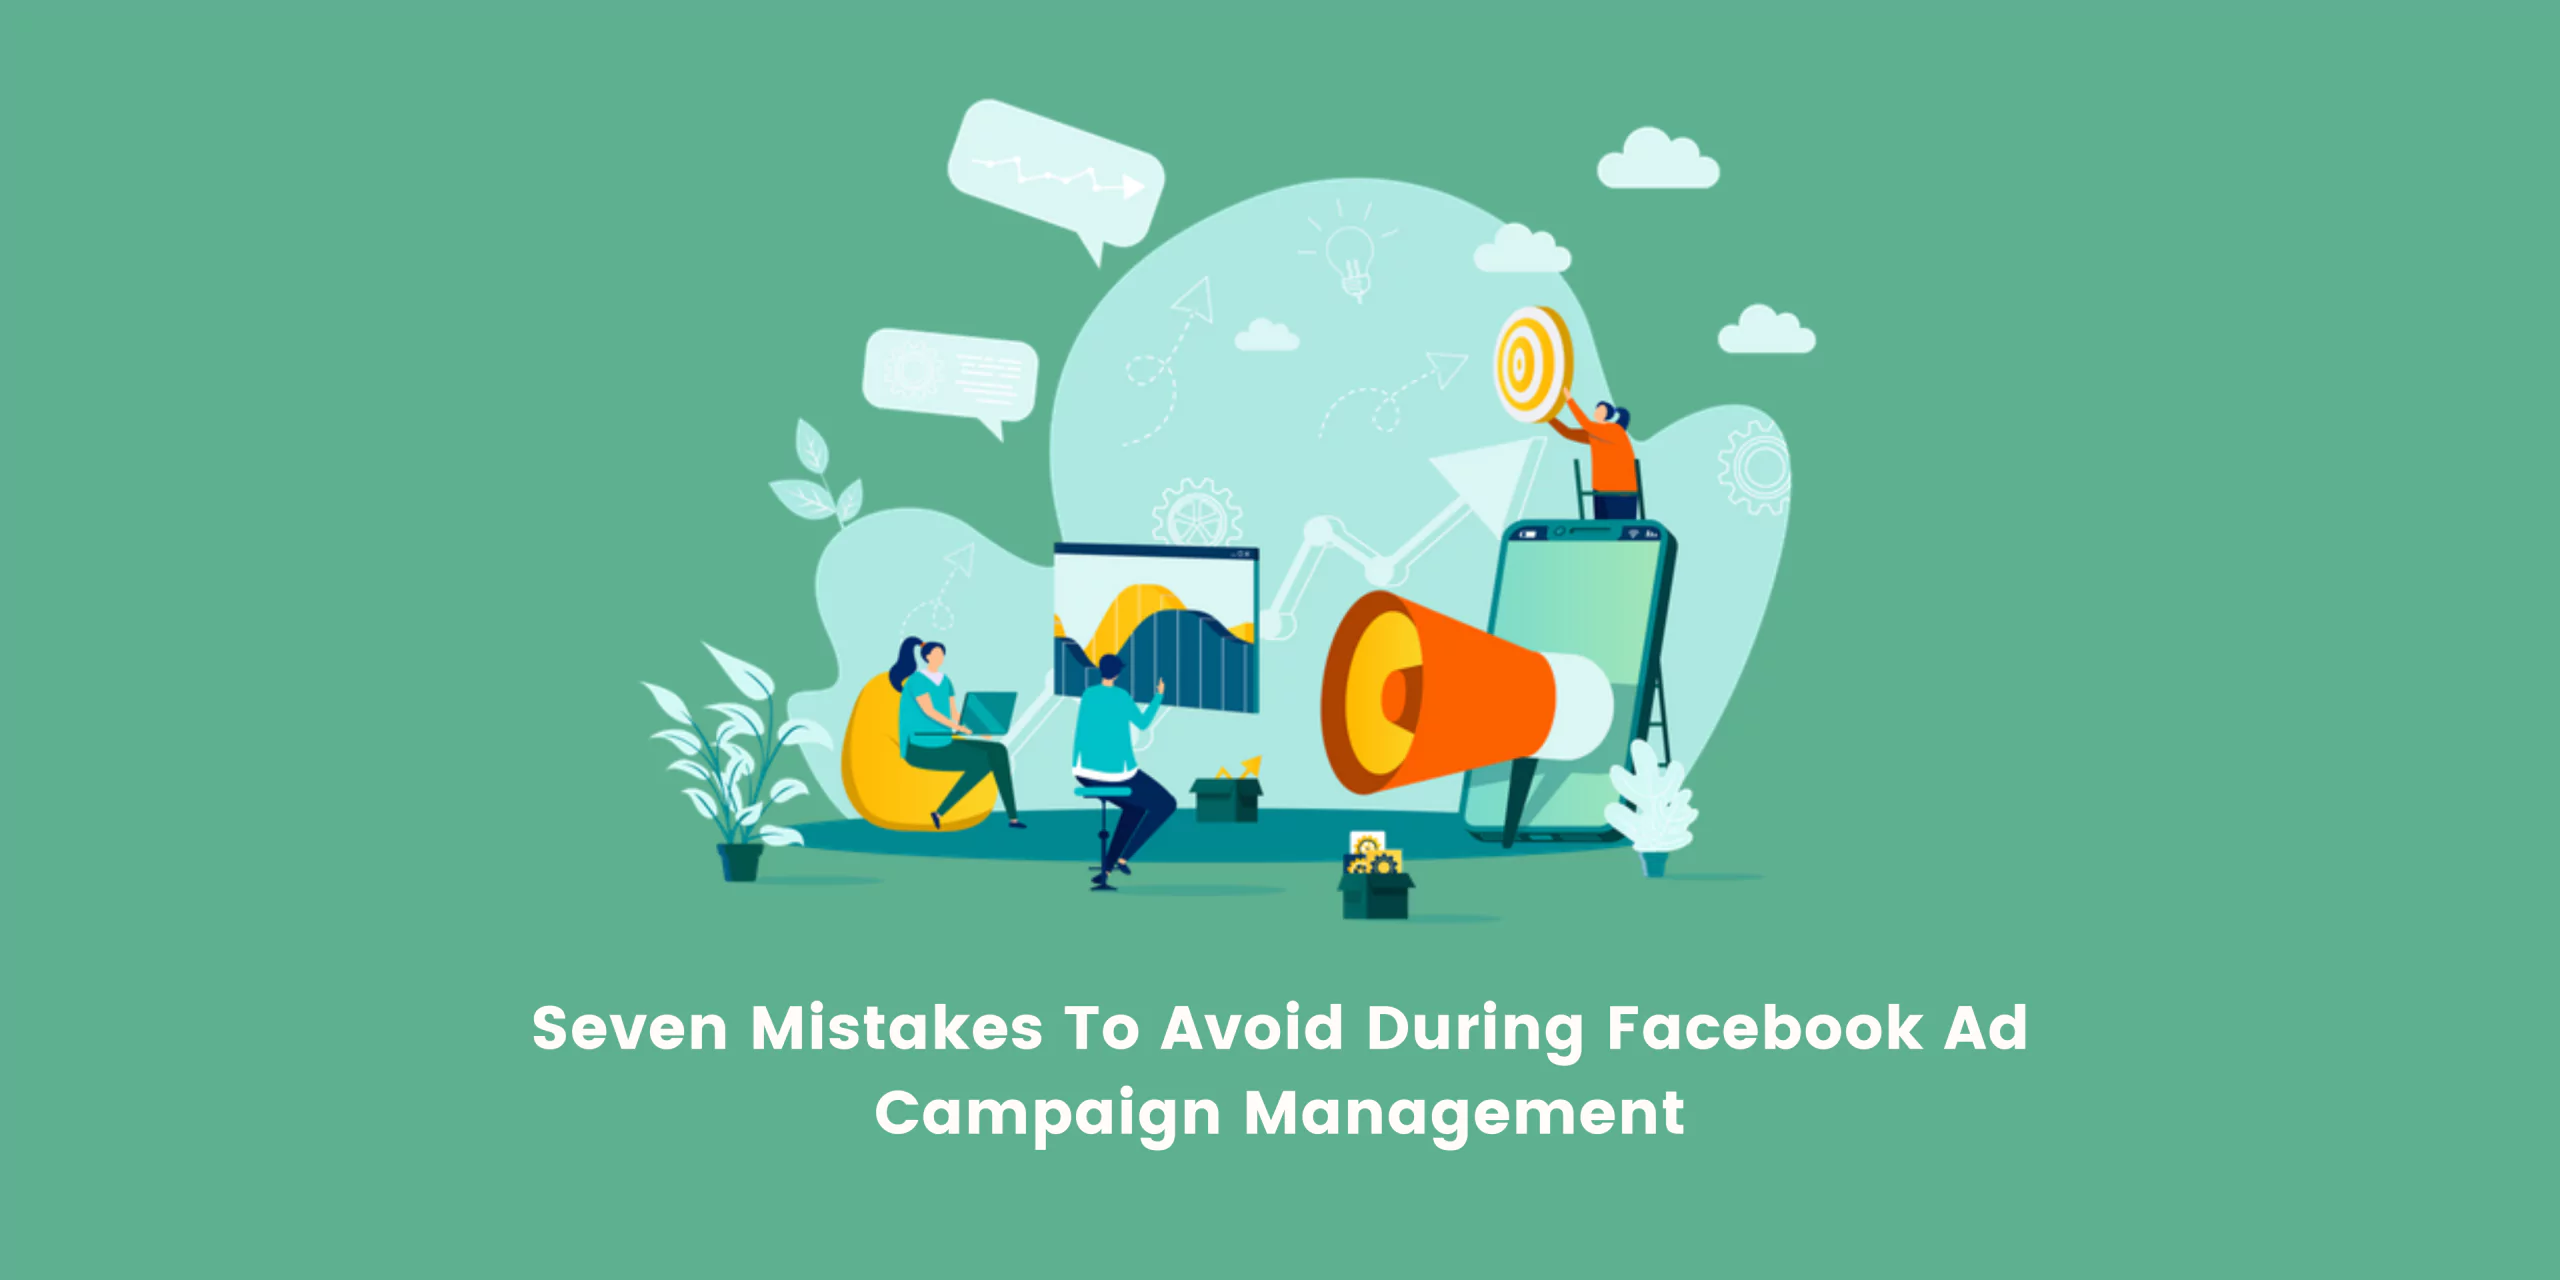 Seven-Mistakes-To-Avoid-During-Facebook-Ad-Campaign-Management.